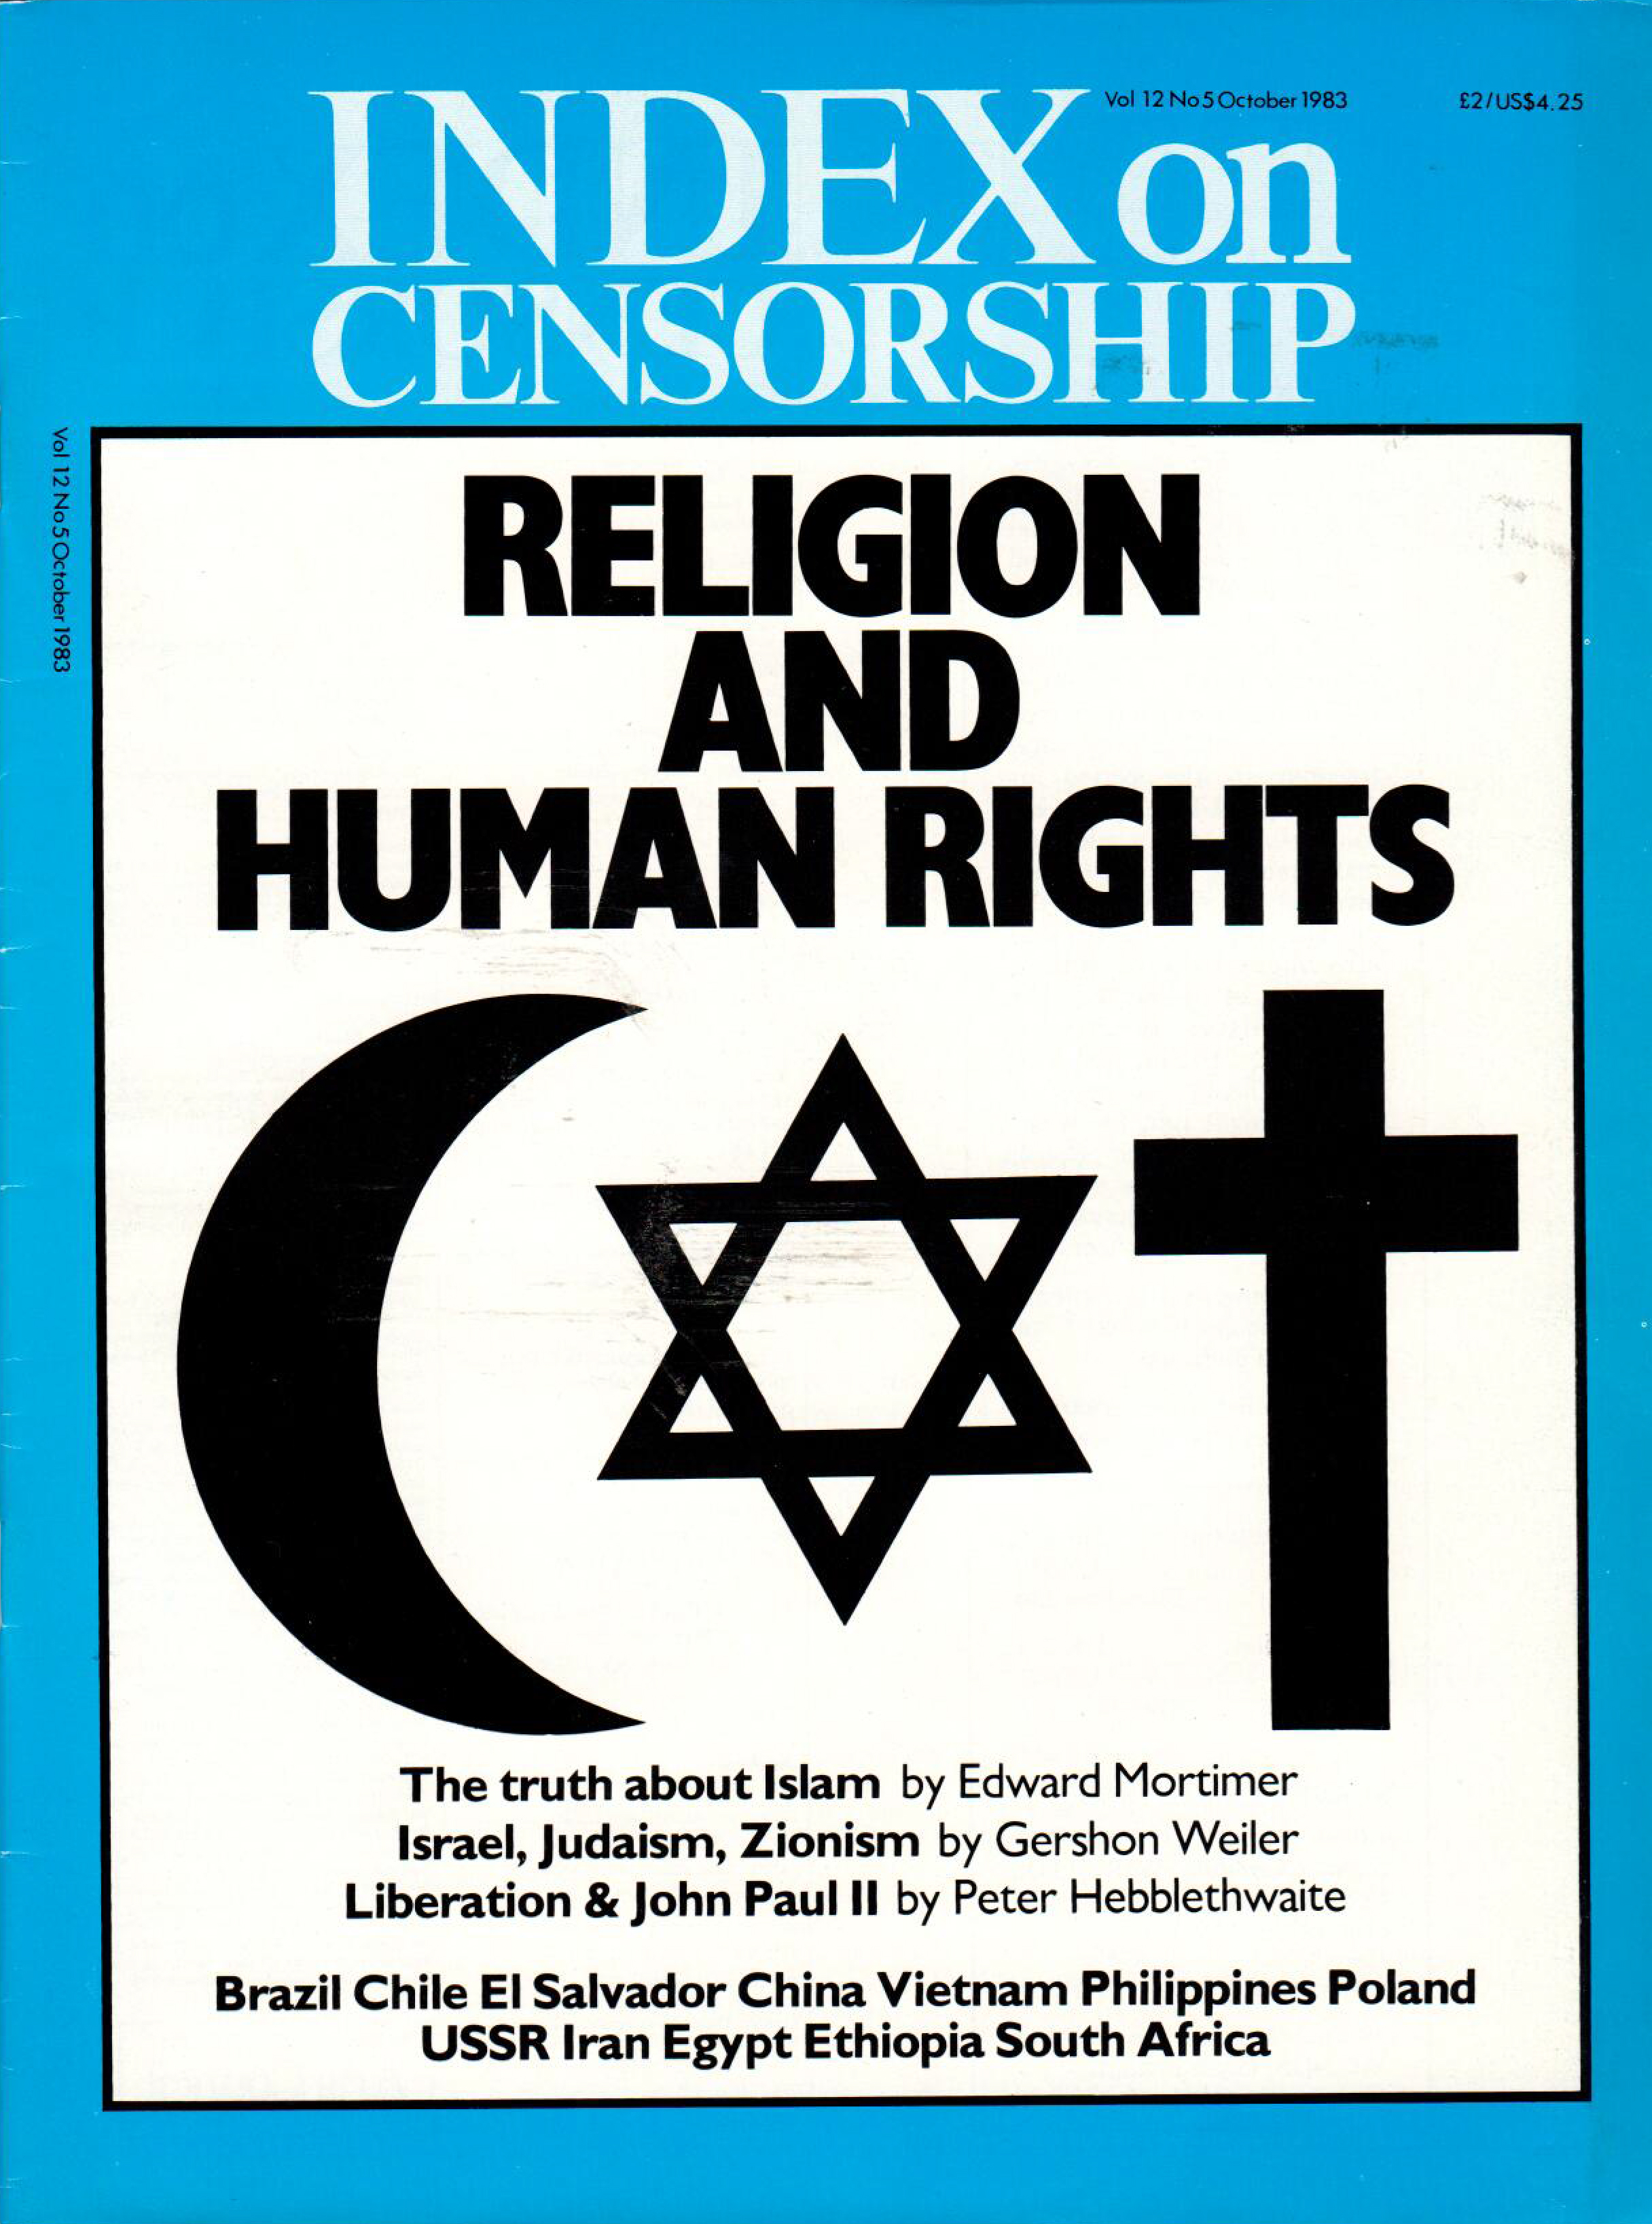 Religion and Human Rights, the October 1983 issue of Index on Censorship magazine.